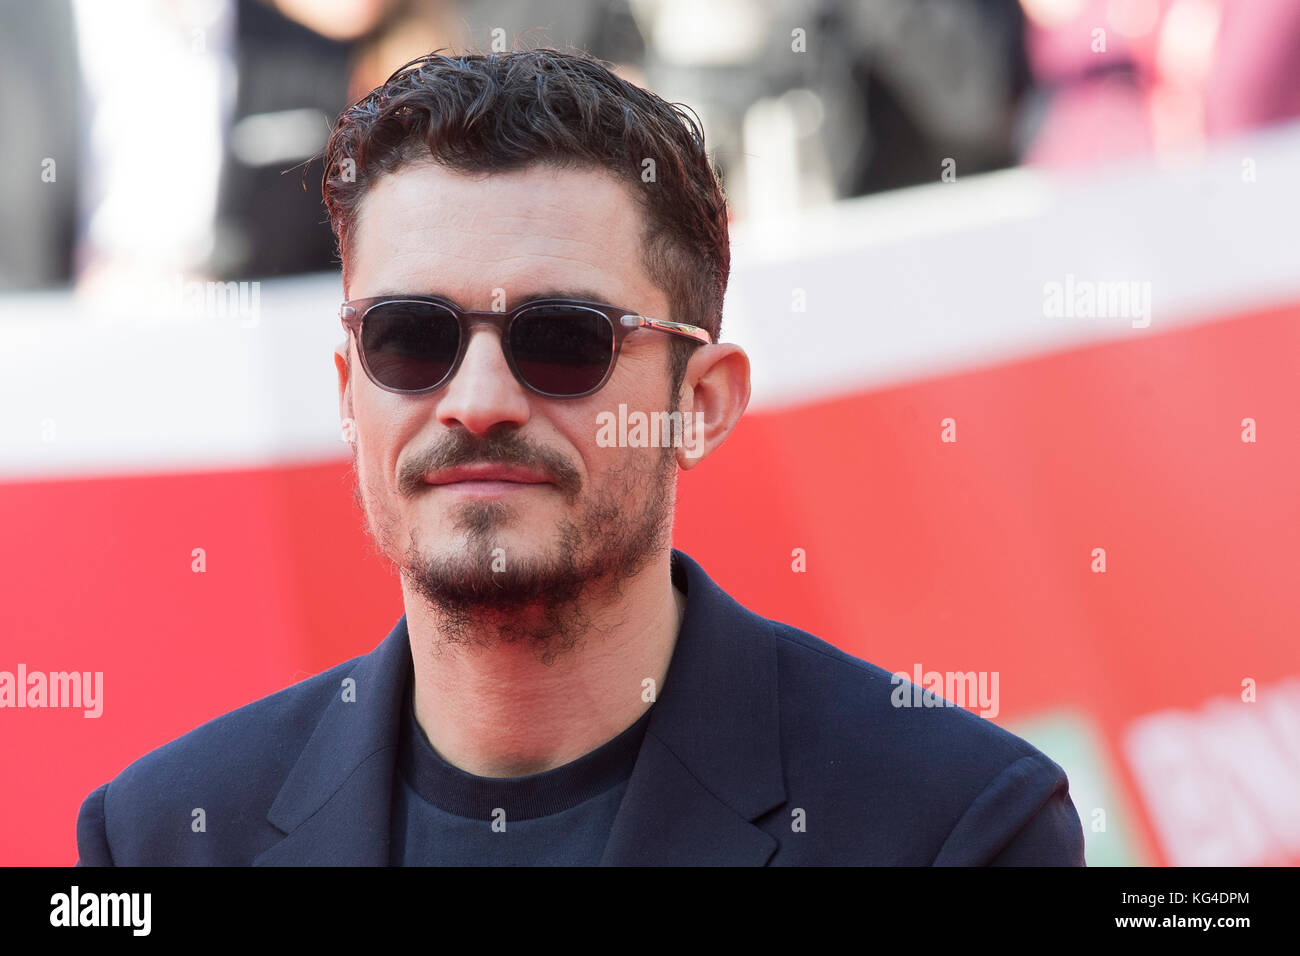 Rome, Italy. 5th November, 2017. Rome, Italy. 04th Nov, 2017. Orlando Bloom attending the red carpet during the 12th Rome Film Fest Credit: Silvia Gerbino/Alamy Live News Credit: Silvia Gerbino/Alamy Live News Stock Photo